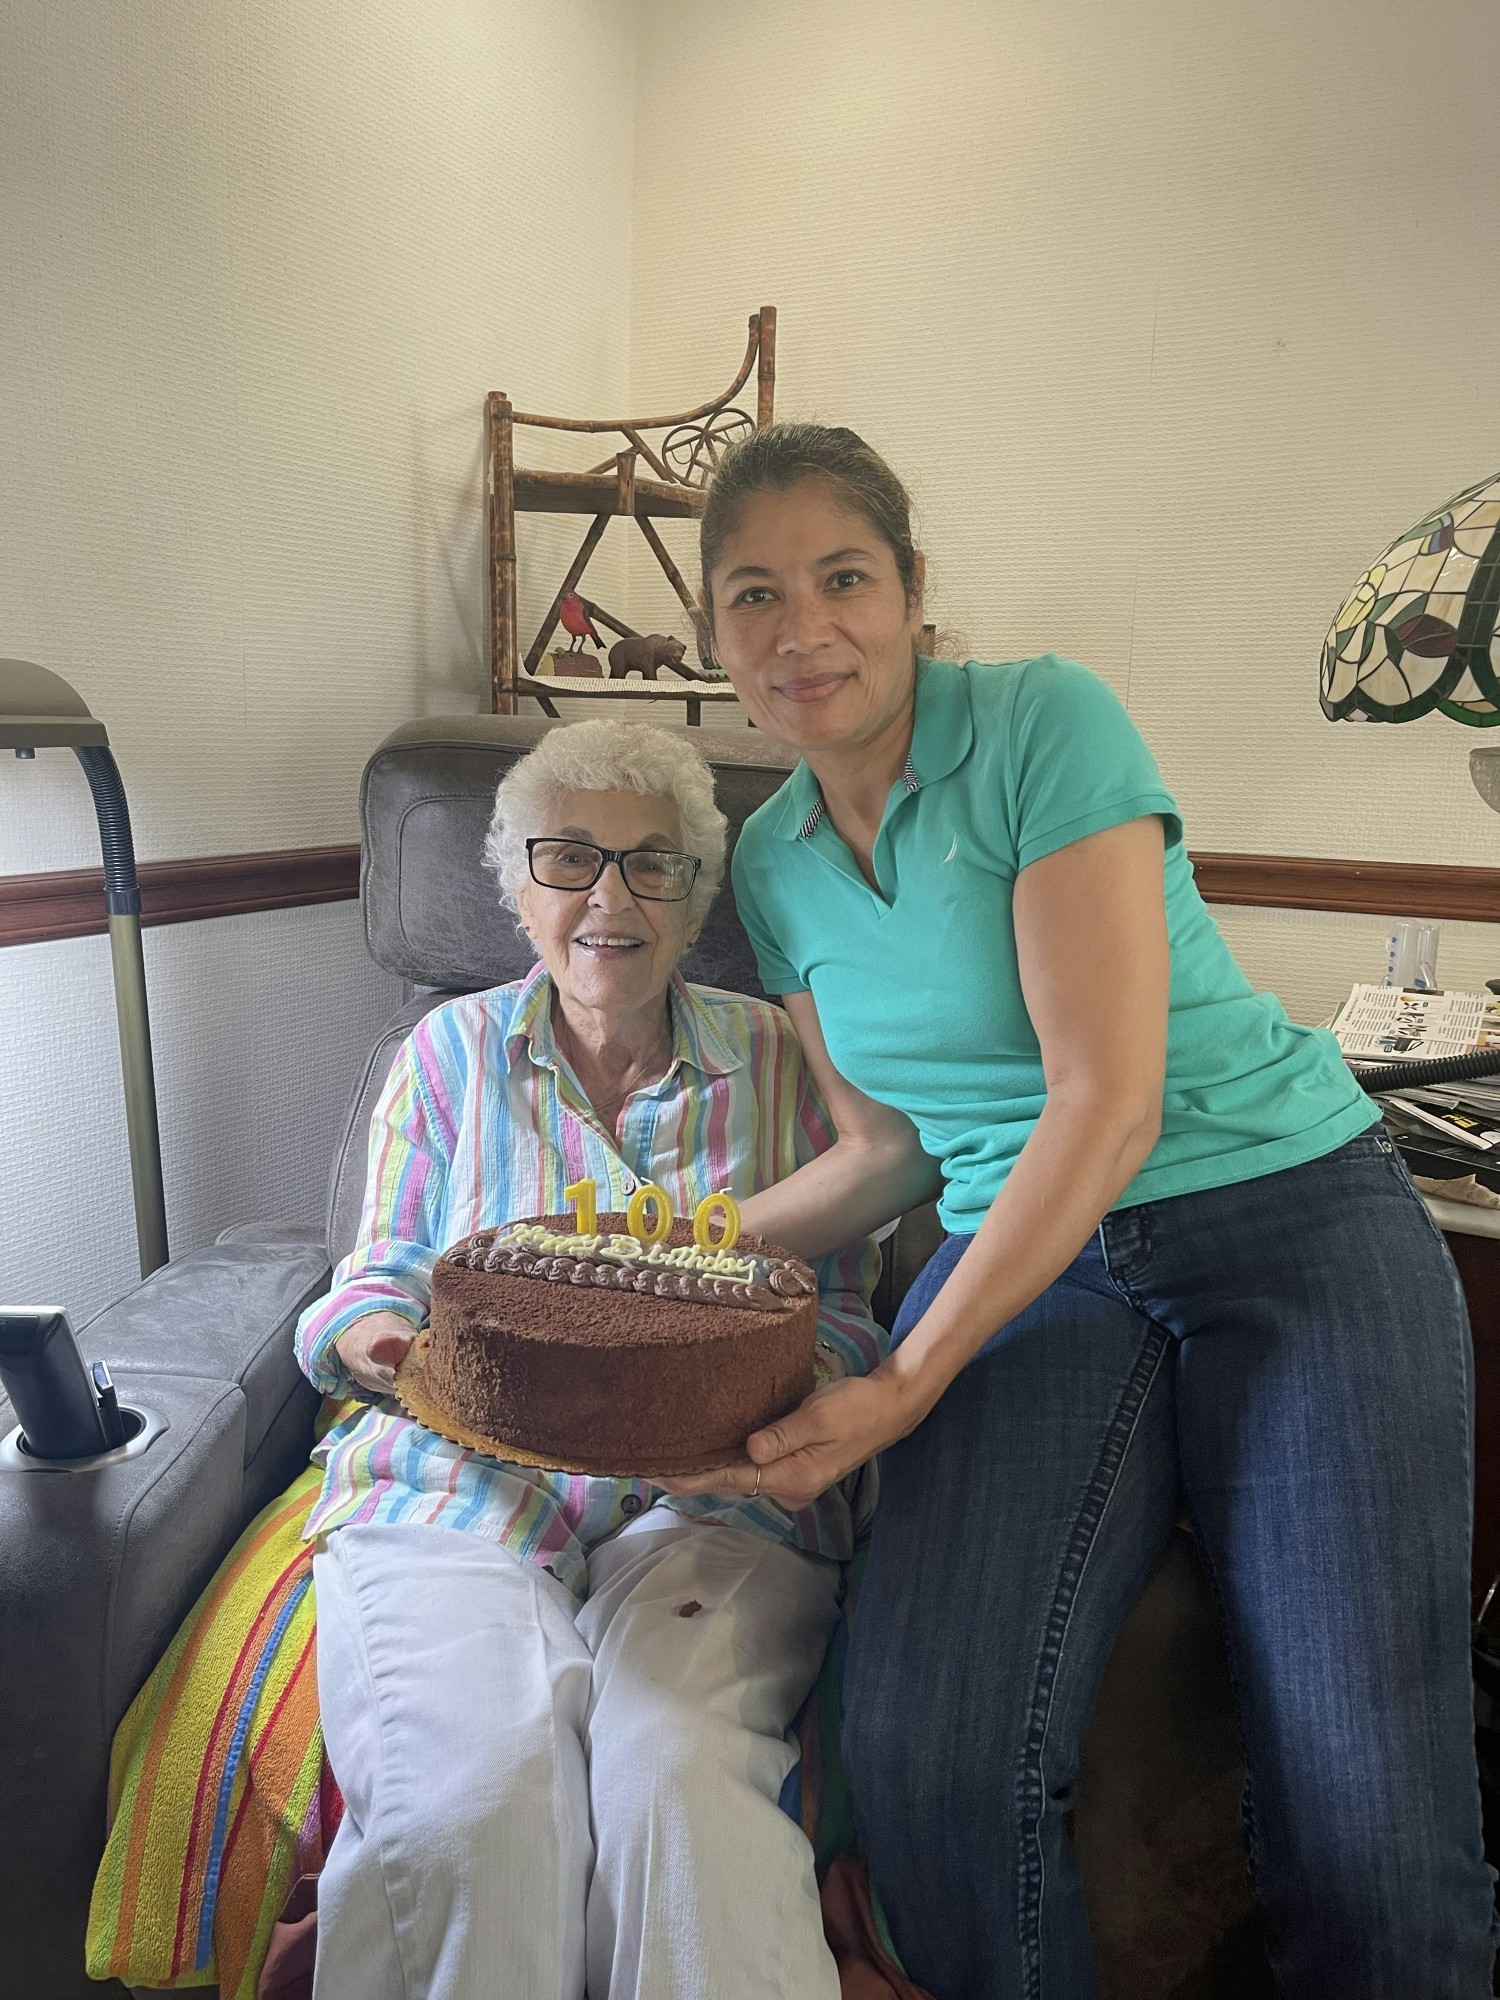 Our caregiver and her client celebrating another milestone birthday!